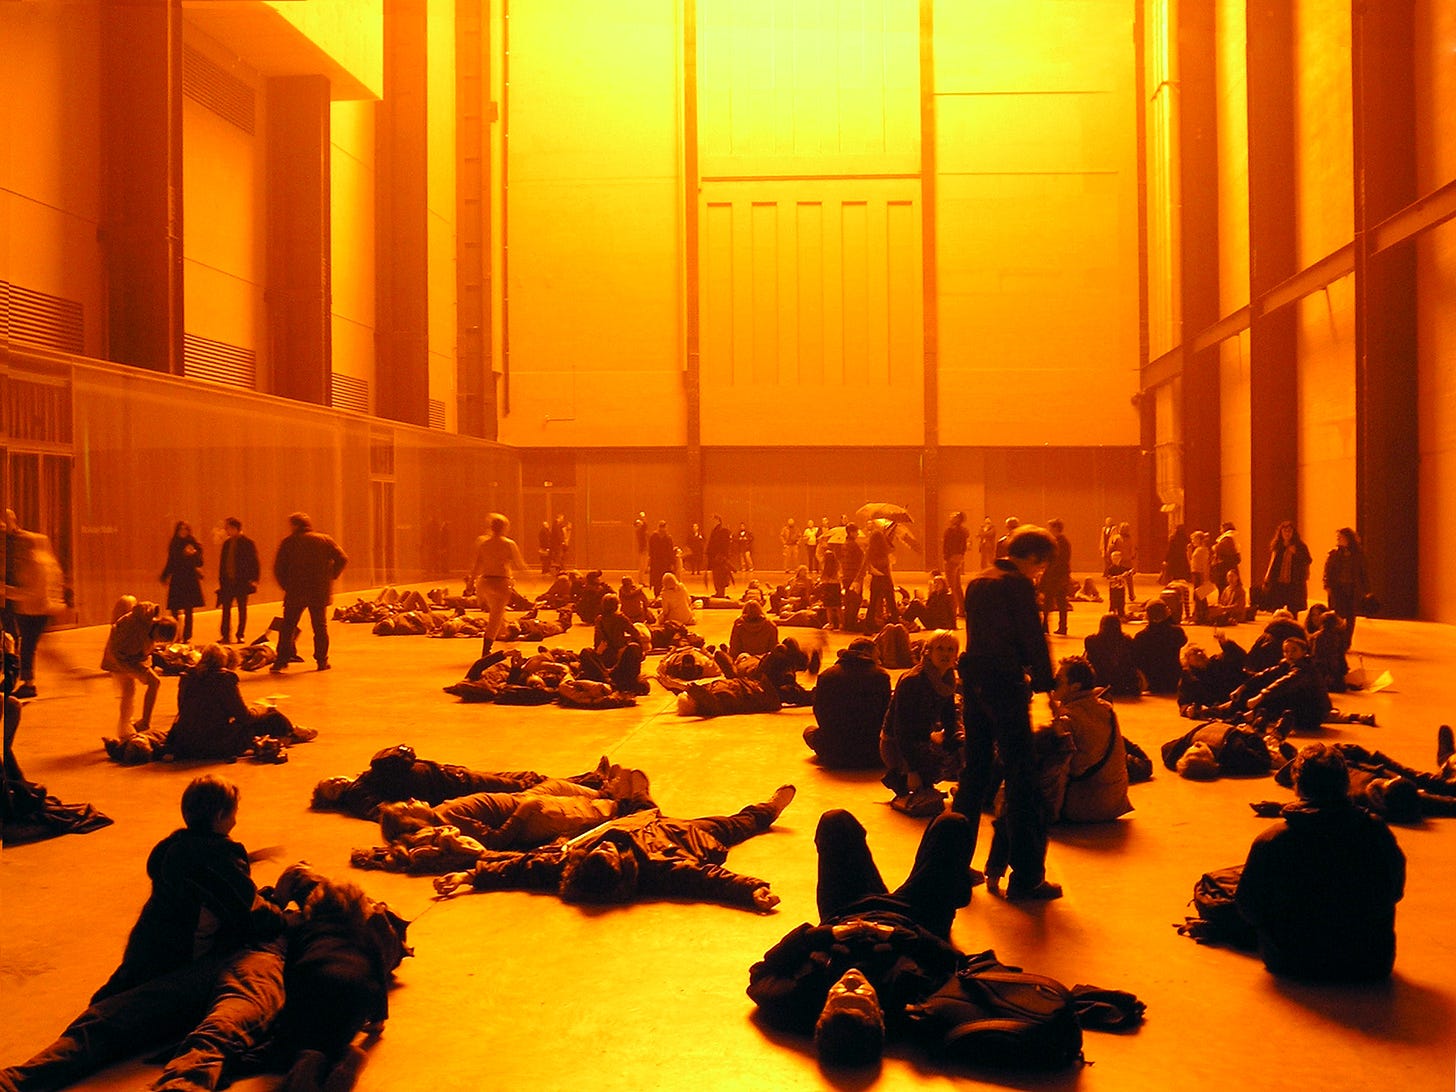 People lie on the ground in Turbine Hall, at the Tate Modern.